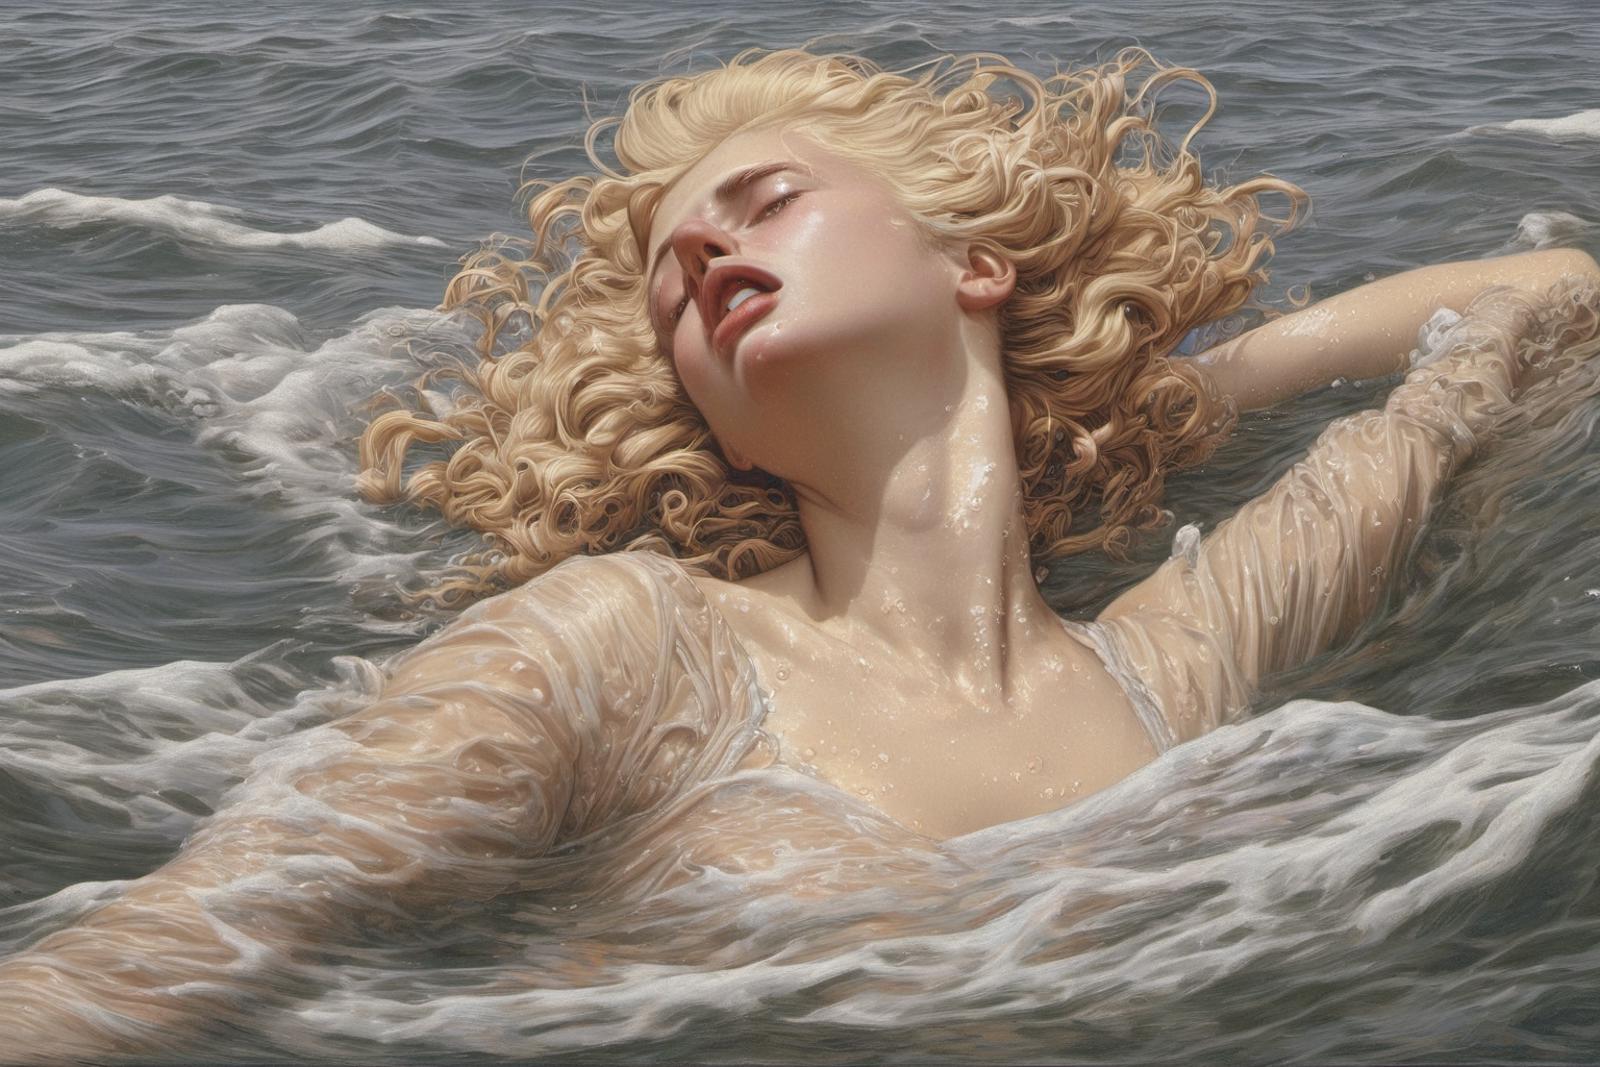 A painting of a woman in a white dress with blonde hair, laying in the water with a peaceful expression.